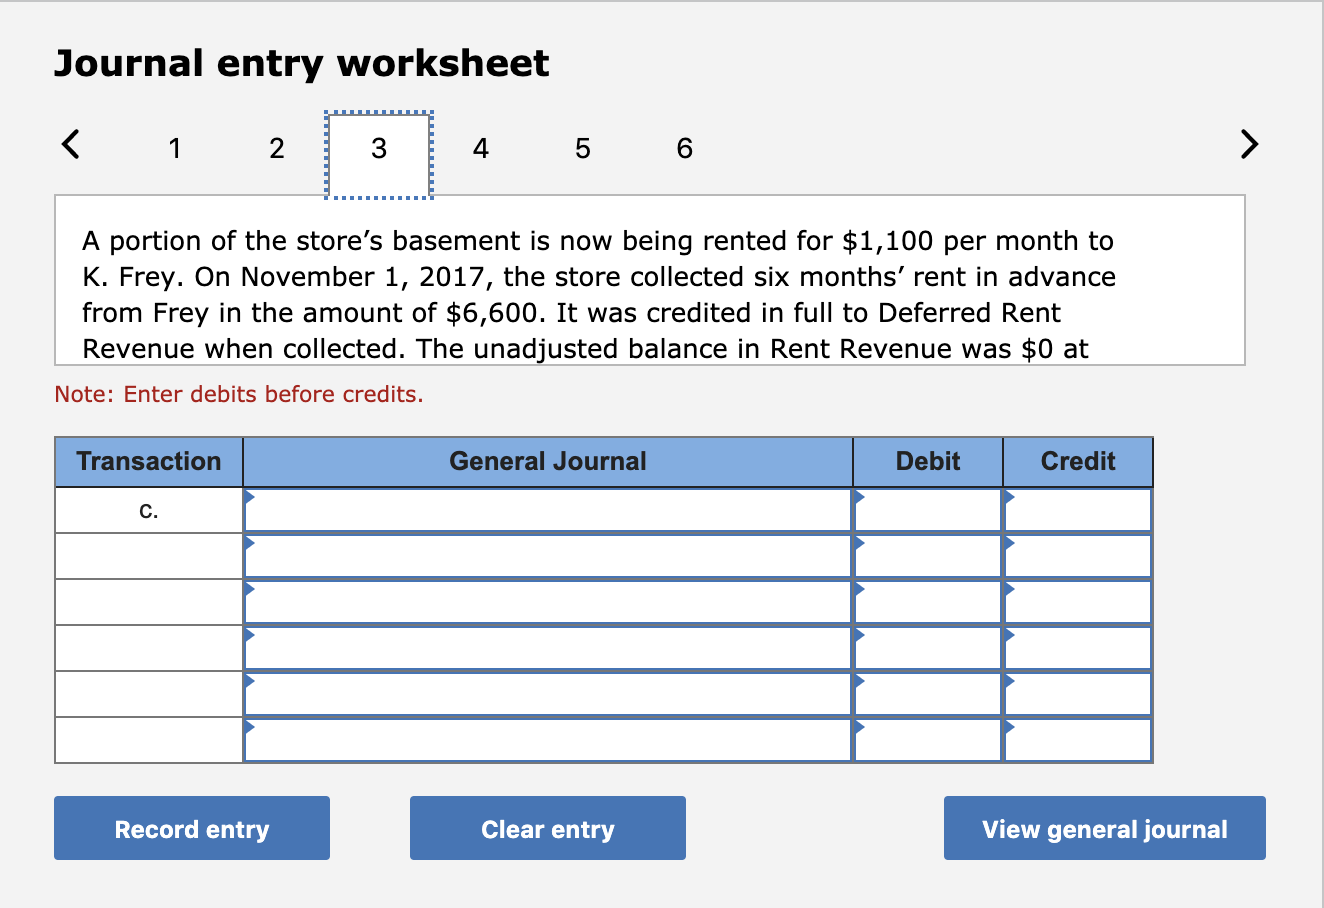 Journal entry worksheet < 1 2 3 4 5 6 a portion of the stores basement is now being rented for $1,100 per month to k. frey.